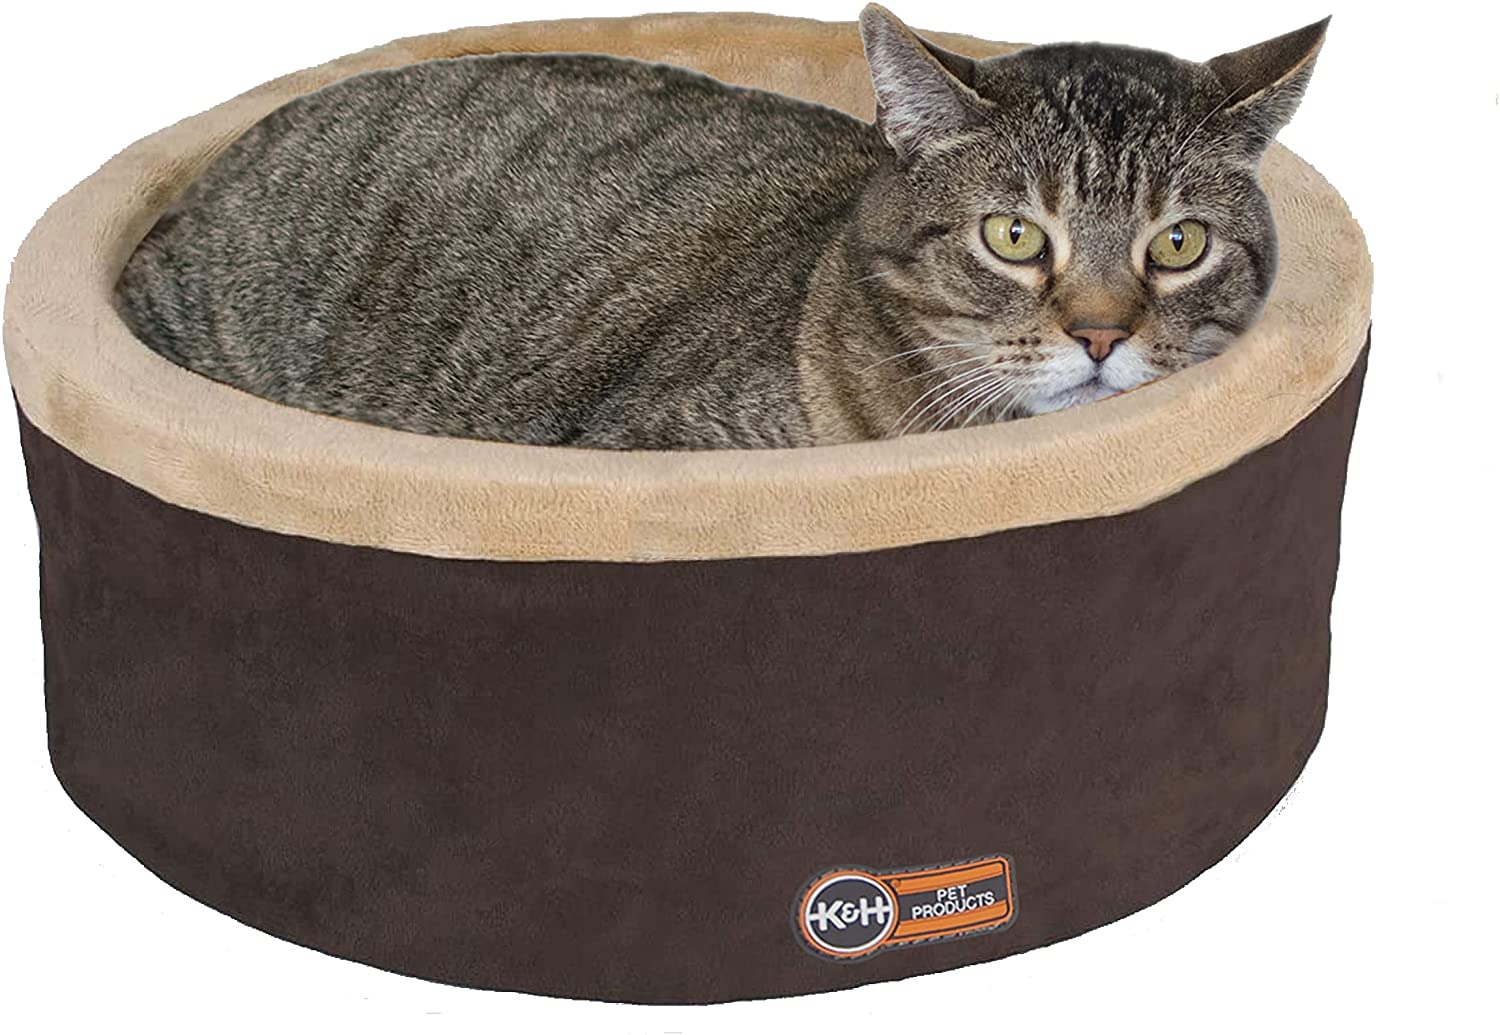 K&H Pet Products Heated Thermo-Kitty Cat Bed